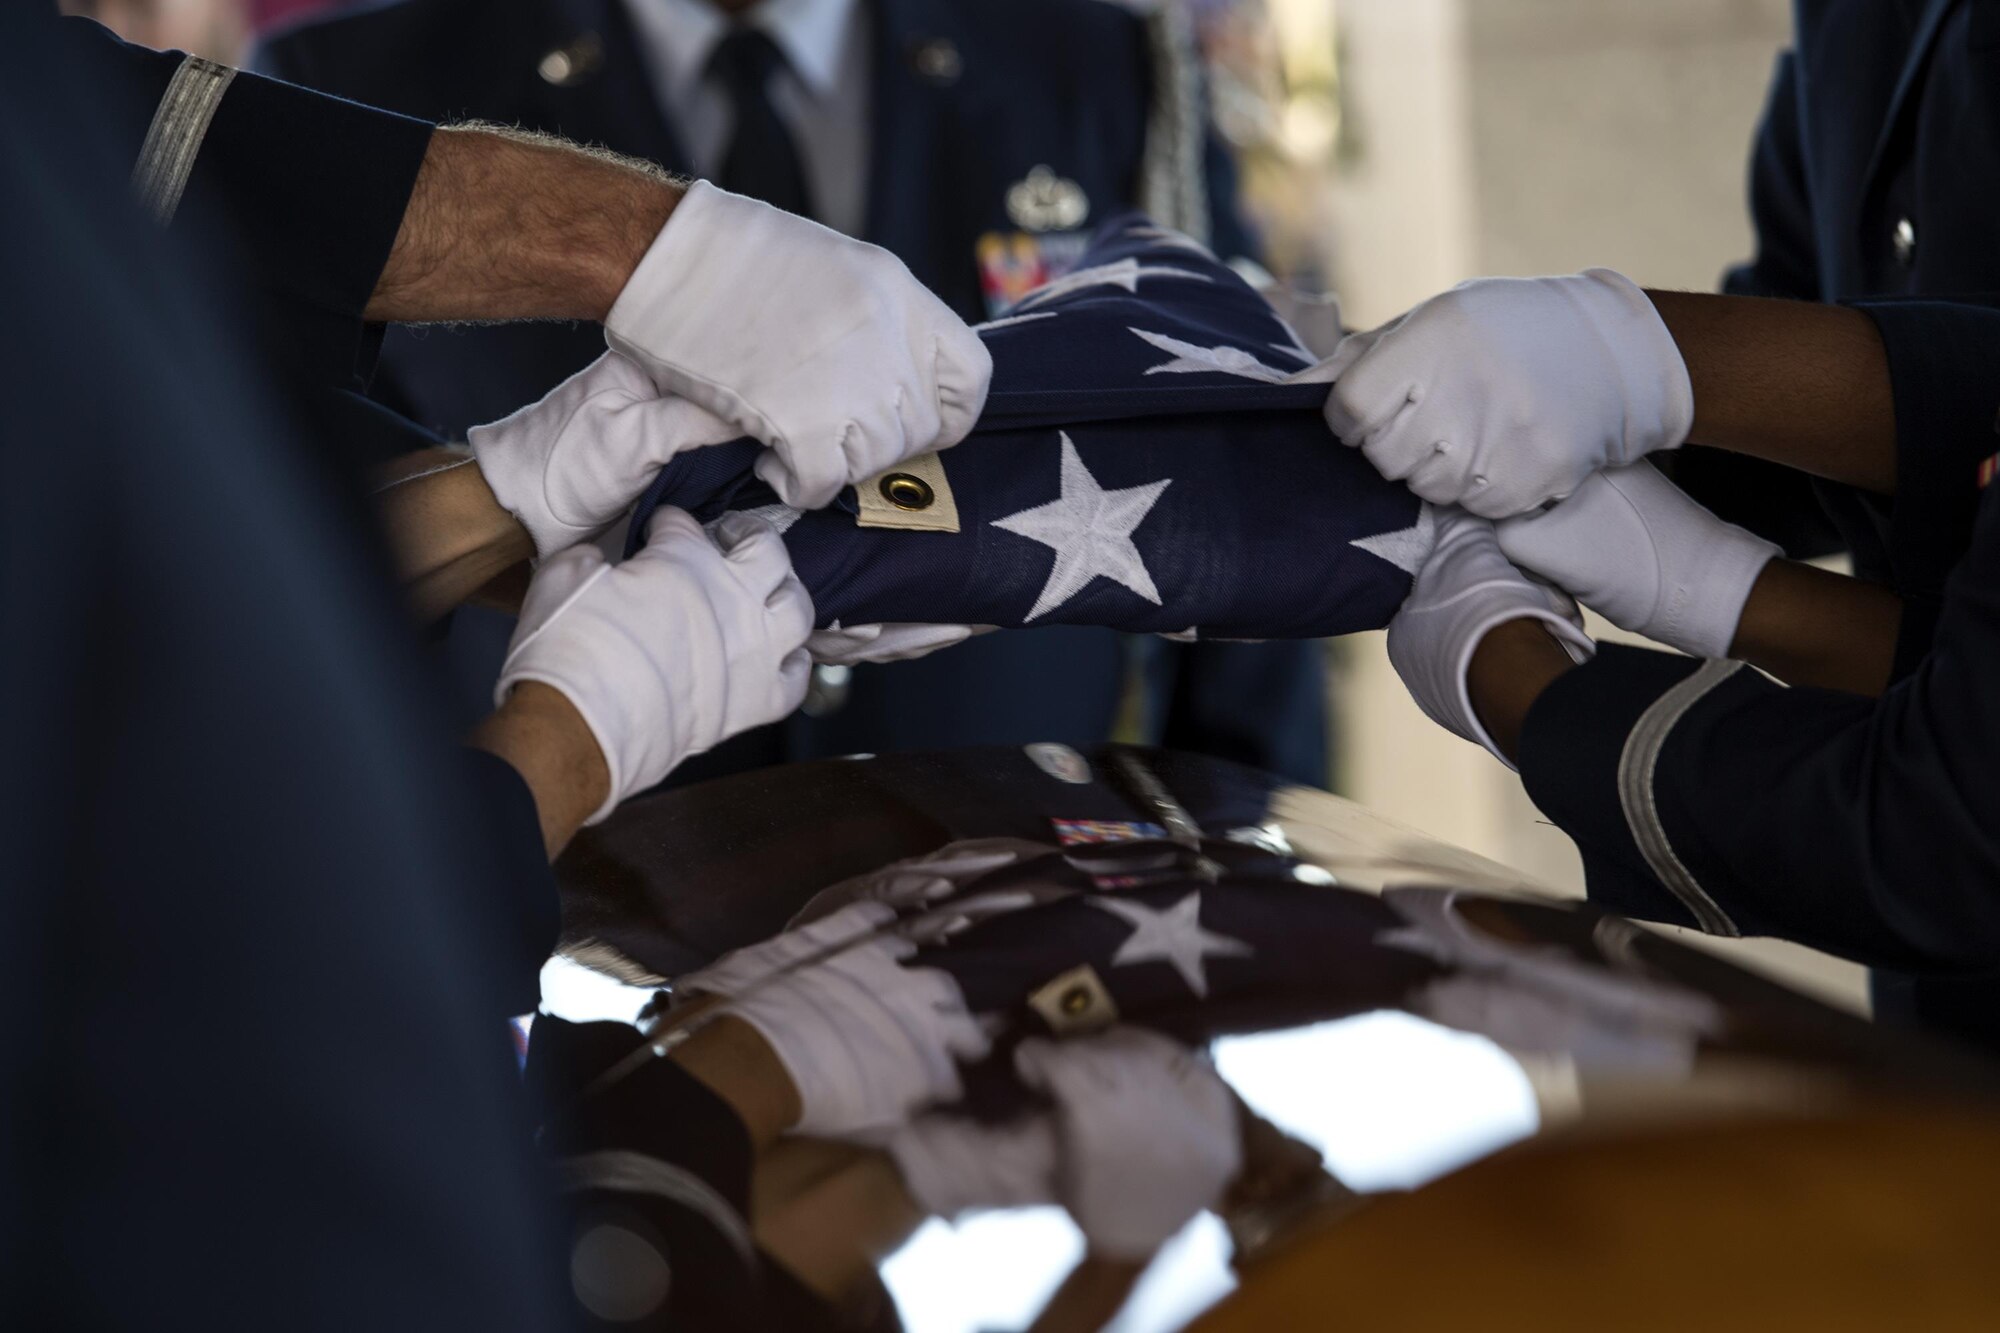 Members of the Moody Air Force Base Honor Guard fold the United States flag during a funeral, Oct. 13, 2016, in Jacksonville, Fla. The pallbearers work together to ensure the flag is folded properly before presenting it to a loved one. (U.S. Air Force photo by Airman 1st Class Janiqua P. Robinson)